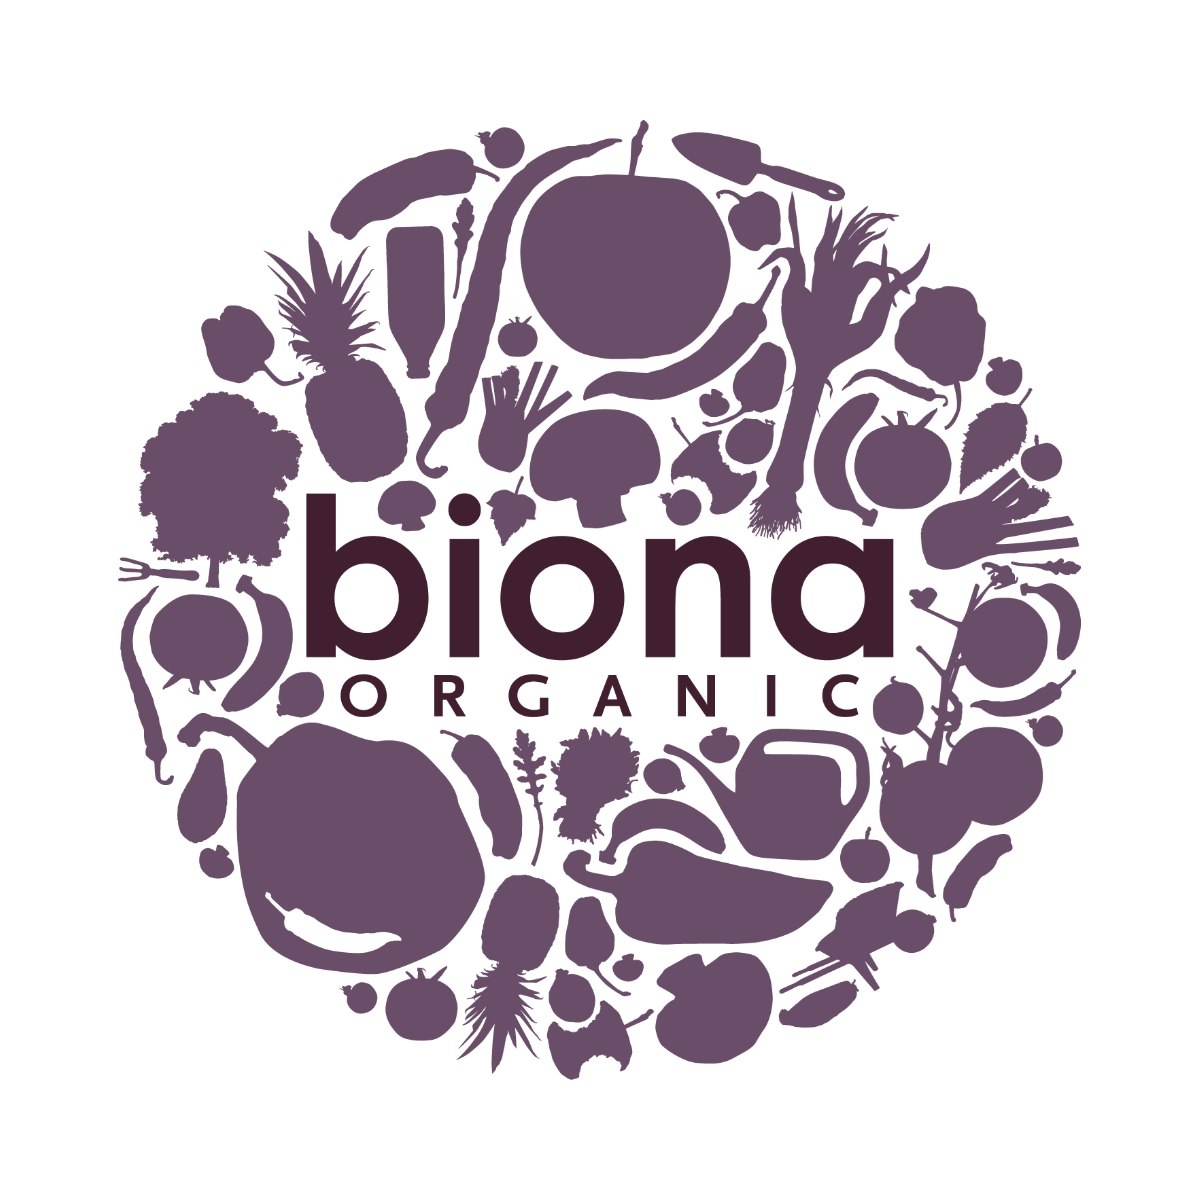 Where to Buy Biona Products